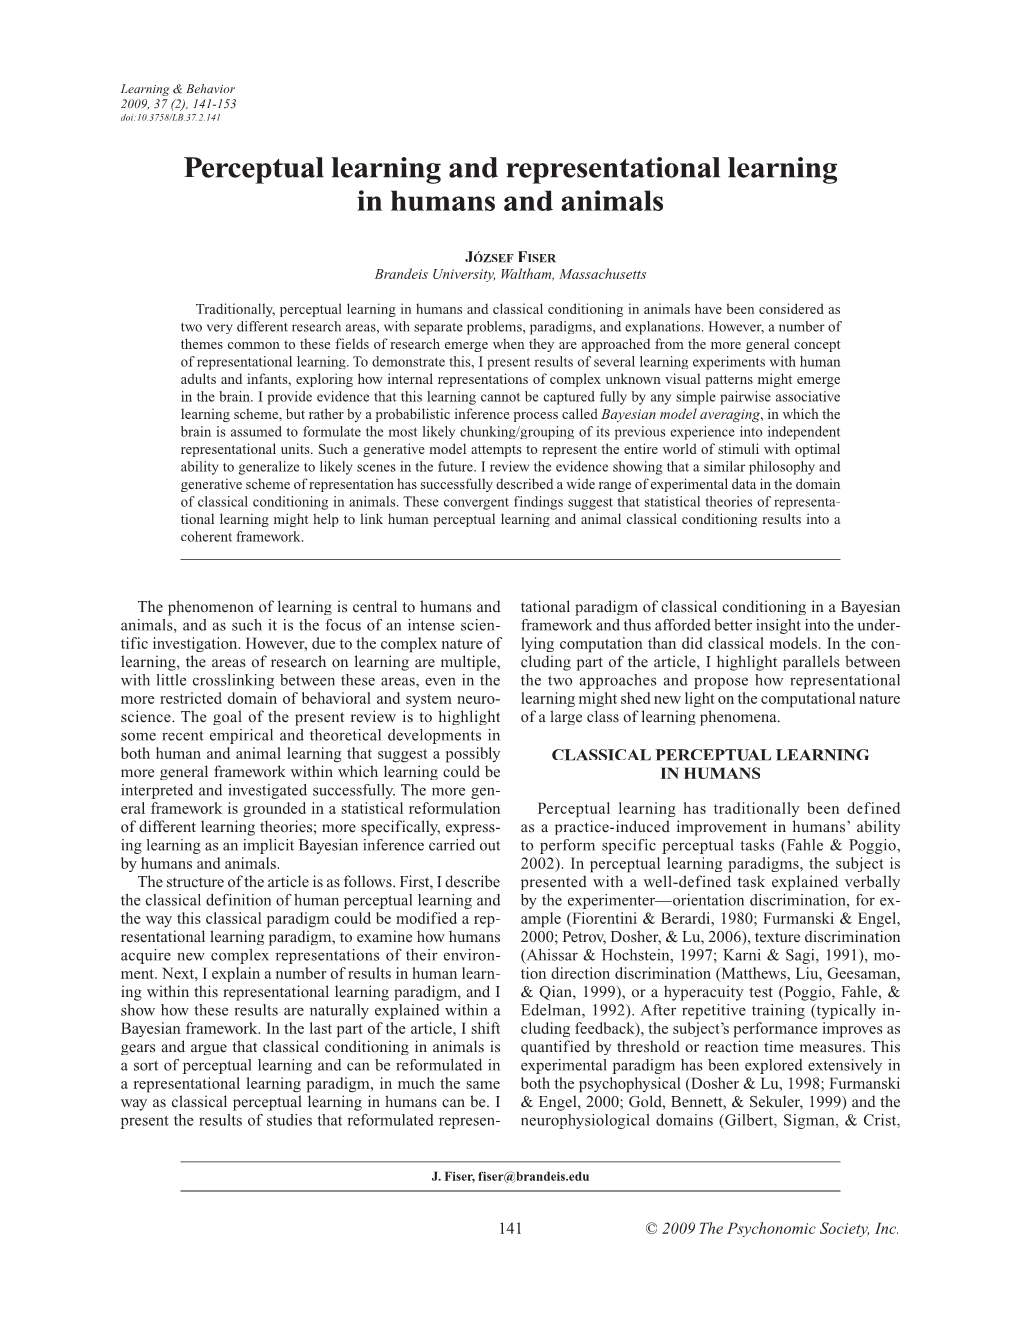 Perceptual Learning and Representational Learning in Humans and Animals